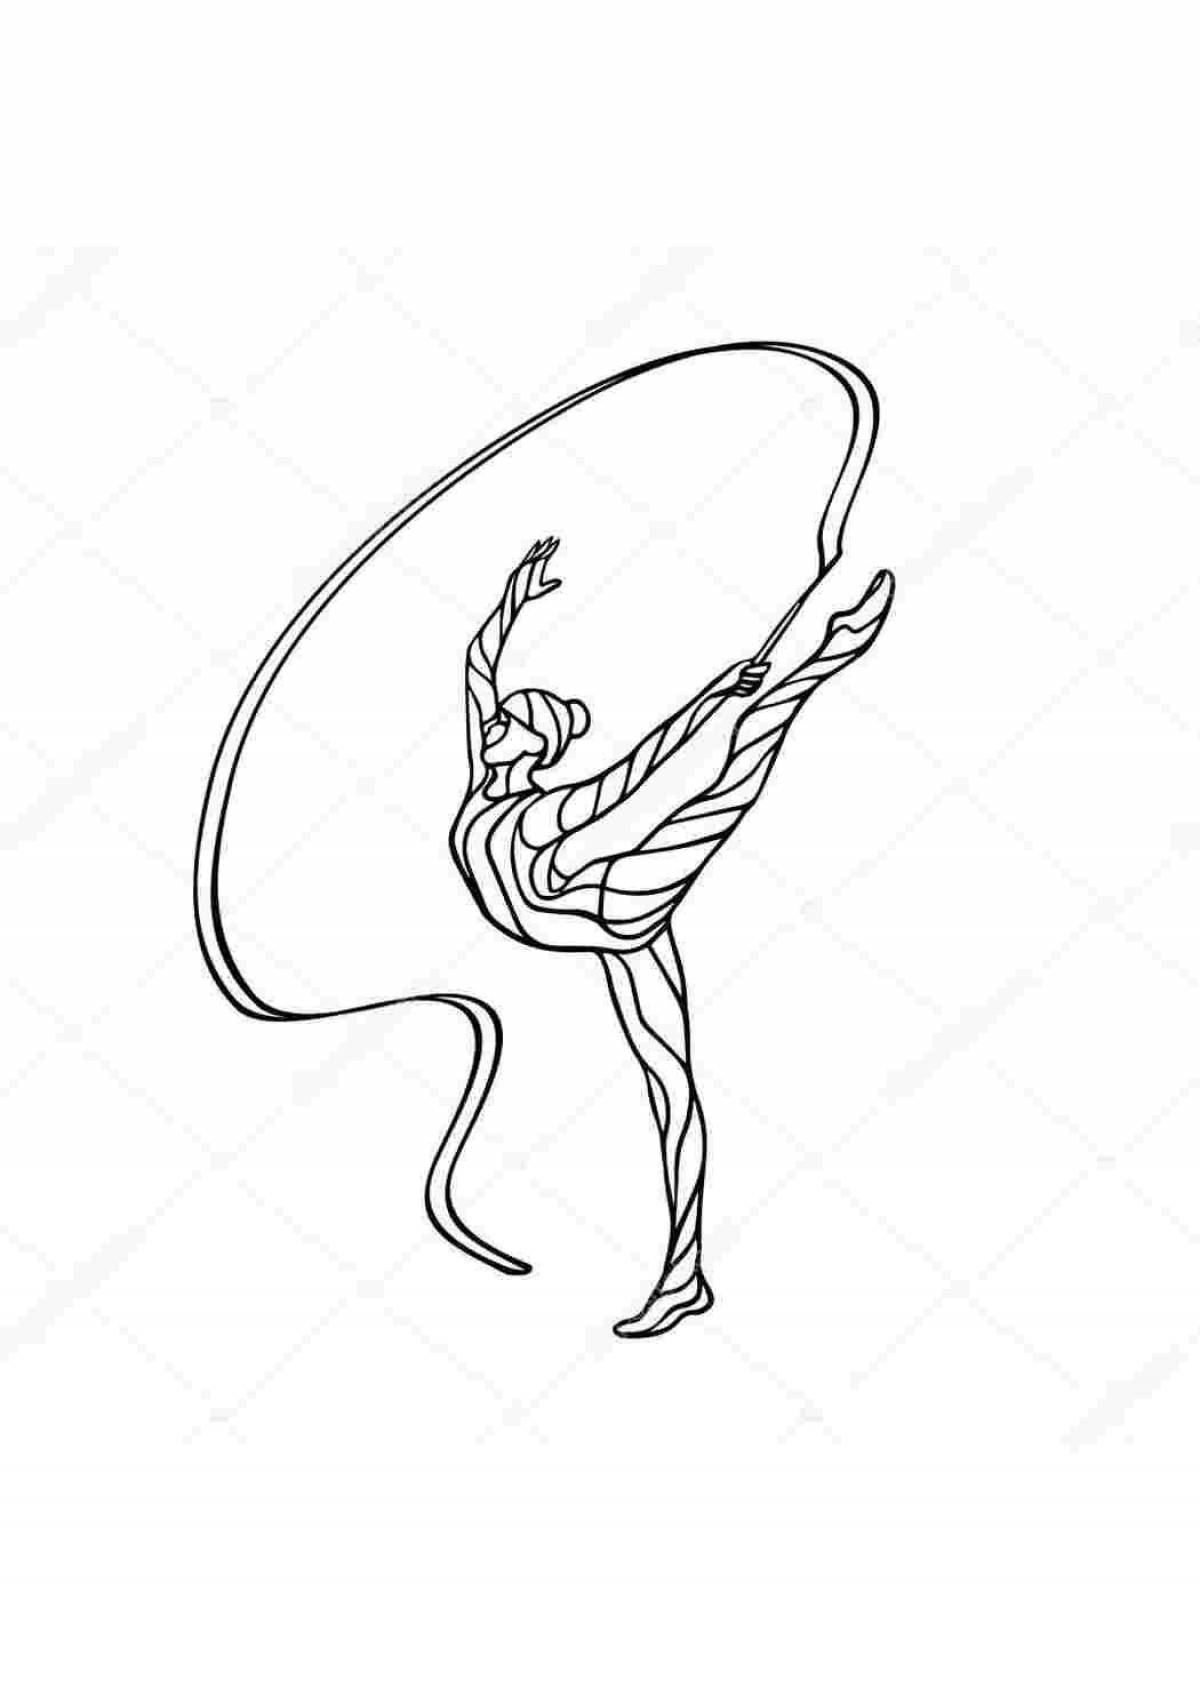 Exquisite rhythmic gymnast coloring book